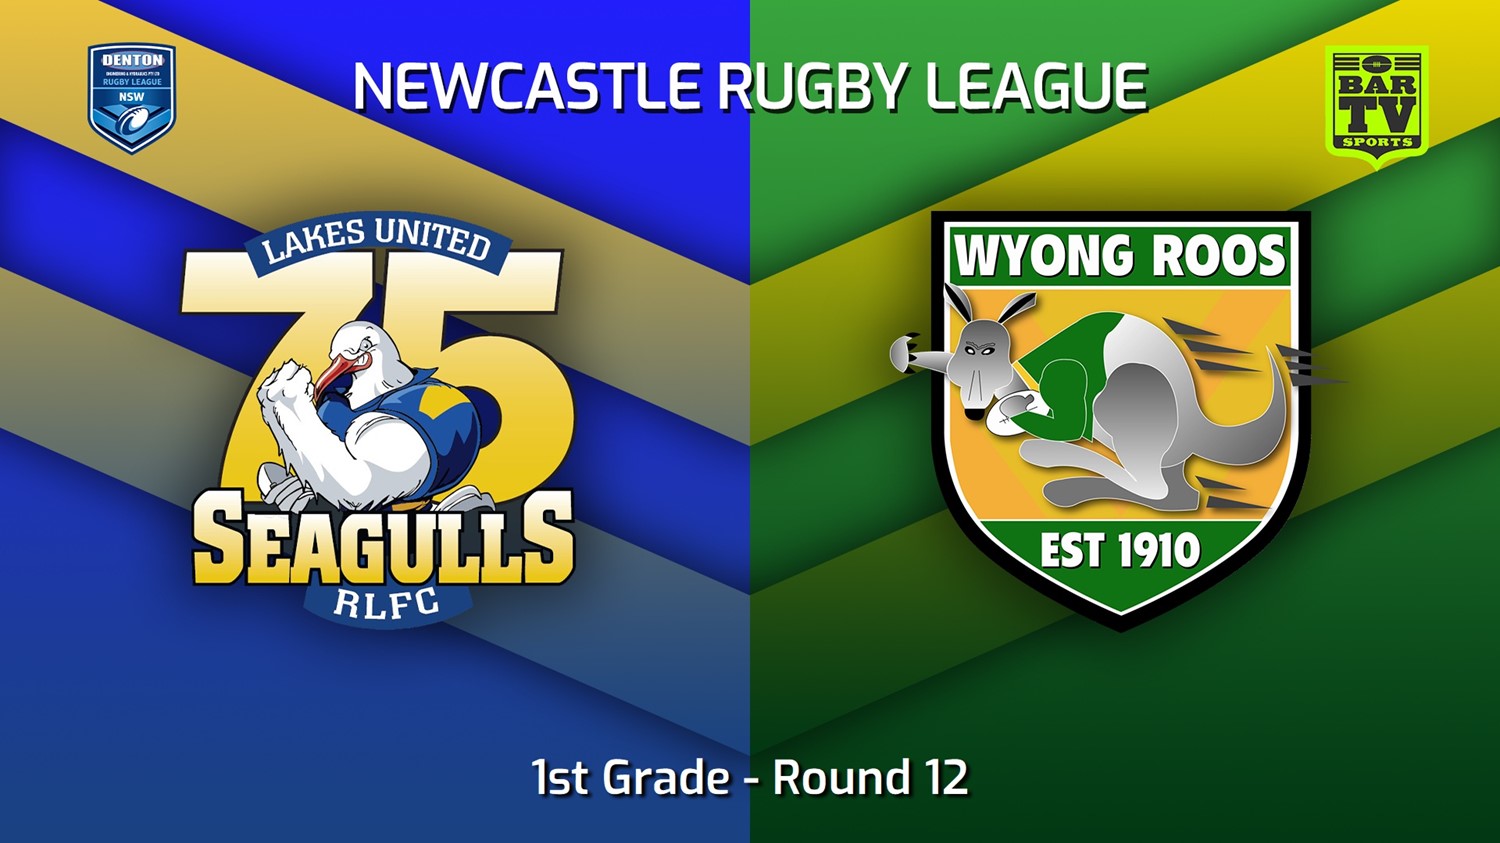 220619-Newcastle Round 12 - 1st Grade - Lakes United v Wyong Roos Slate Image